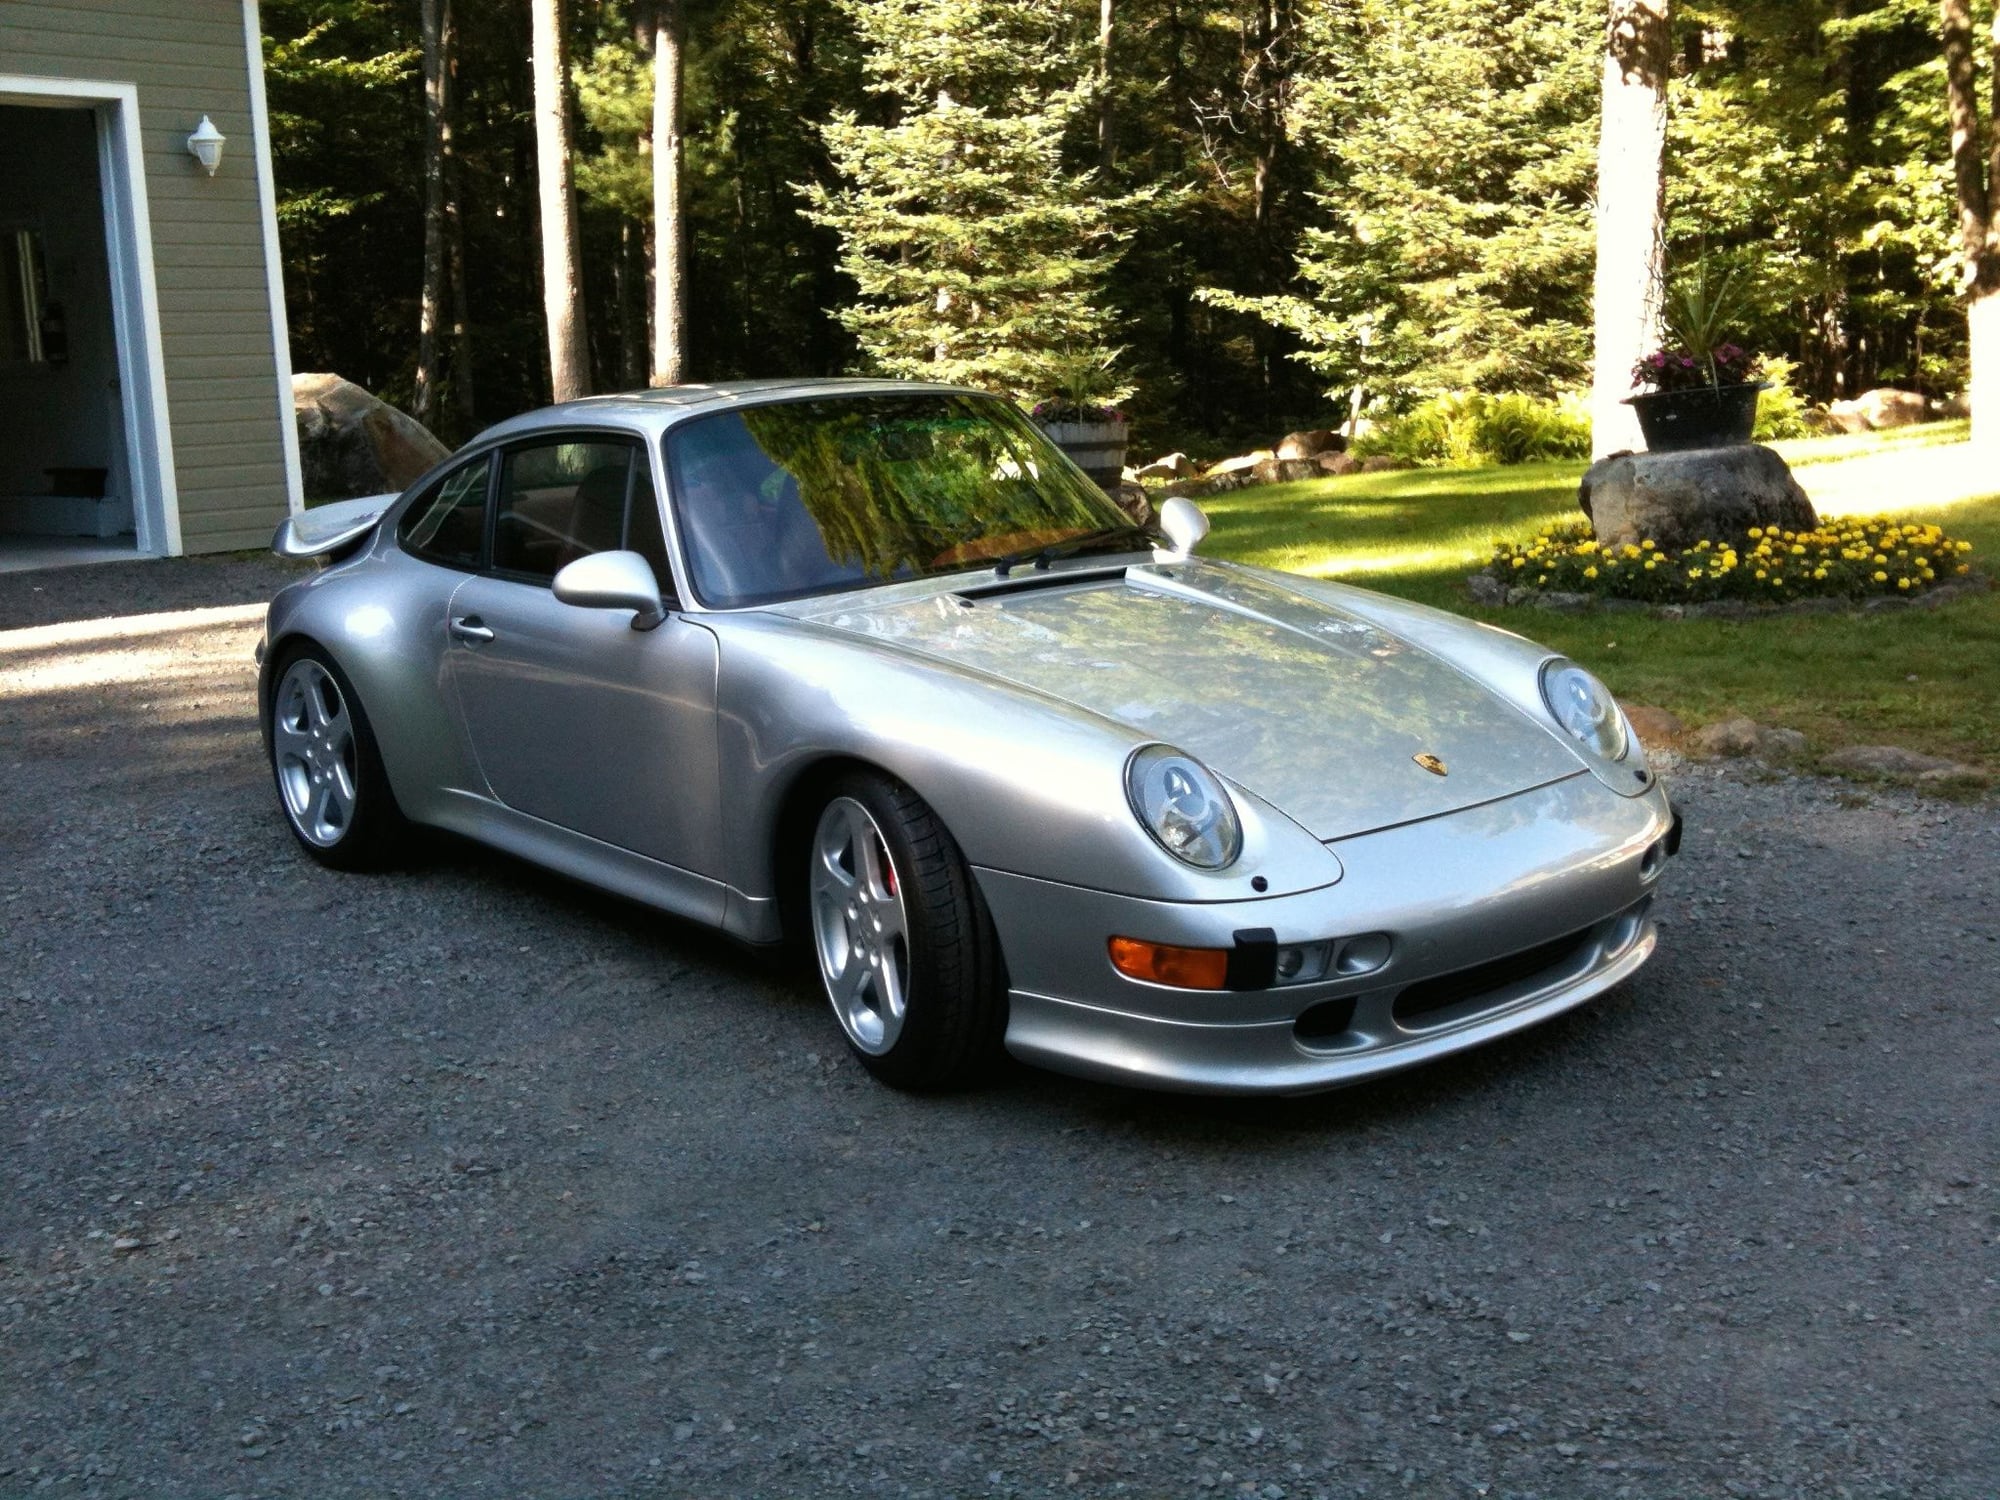 1997 Porsche 911 - 993 Twin Turbo - Used - VIN WP0AC2994VS375488 - 51,600 Miles - 6 cyl - AWD - Manual - Coupe - Silver - Montreal, QC J0R1B0, Canada